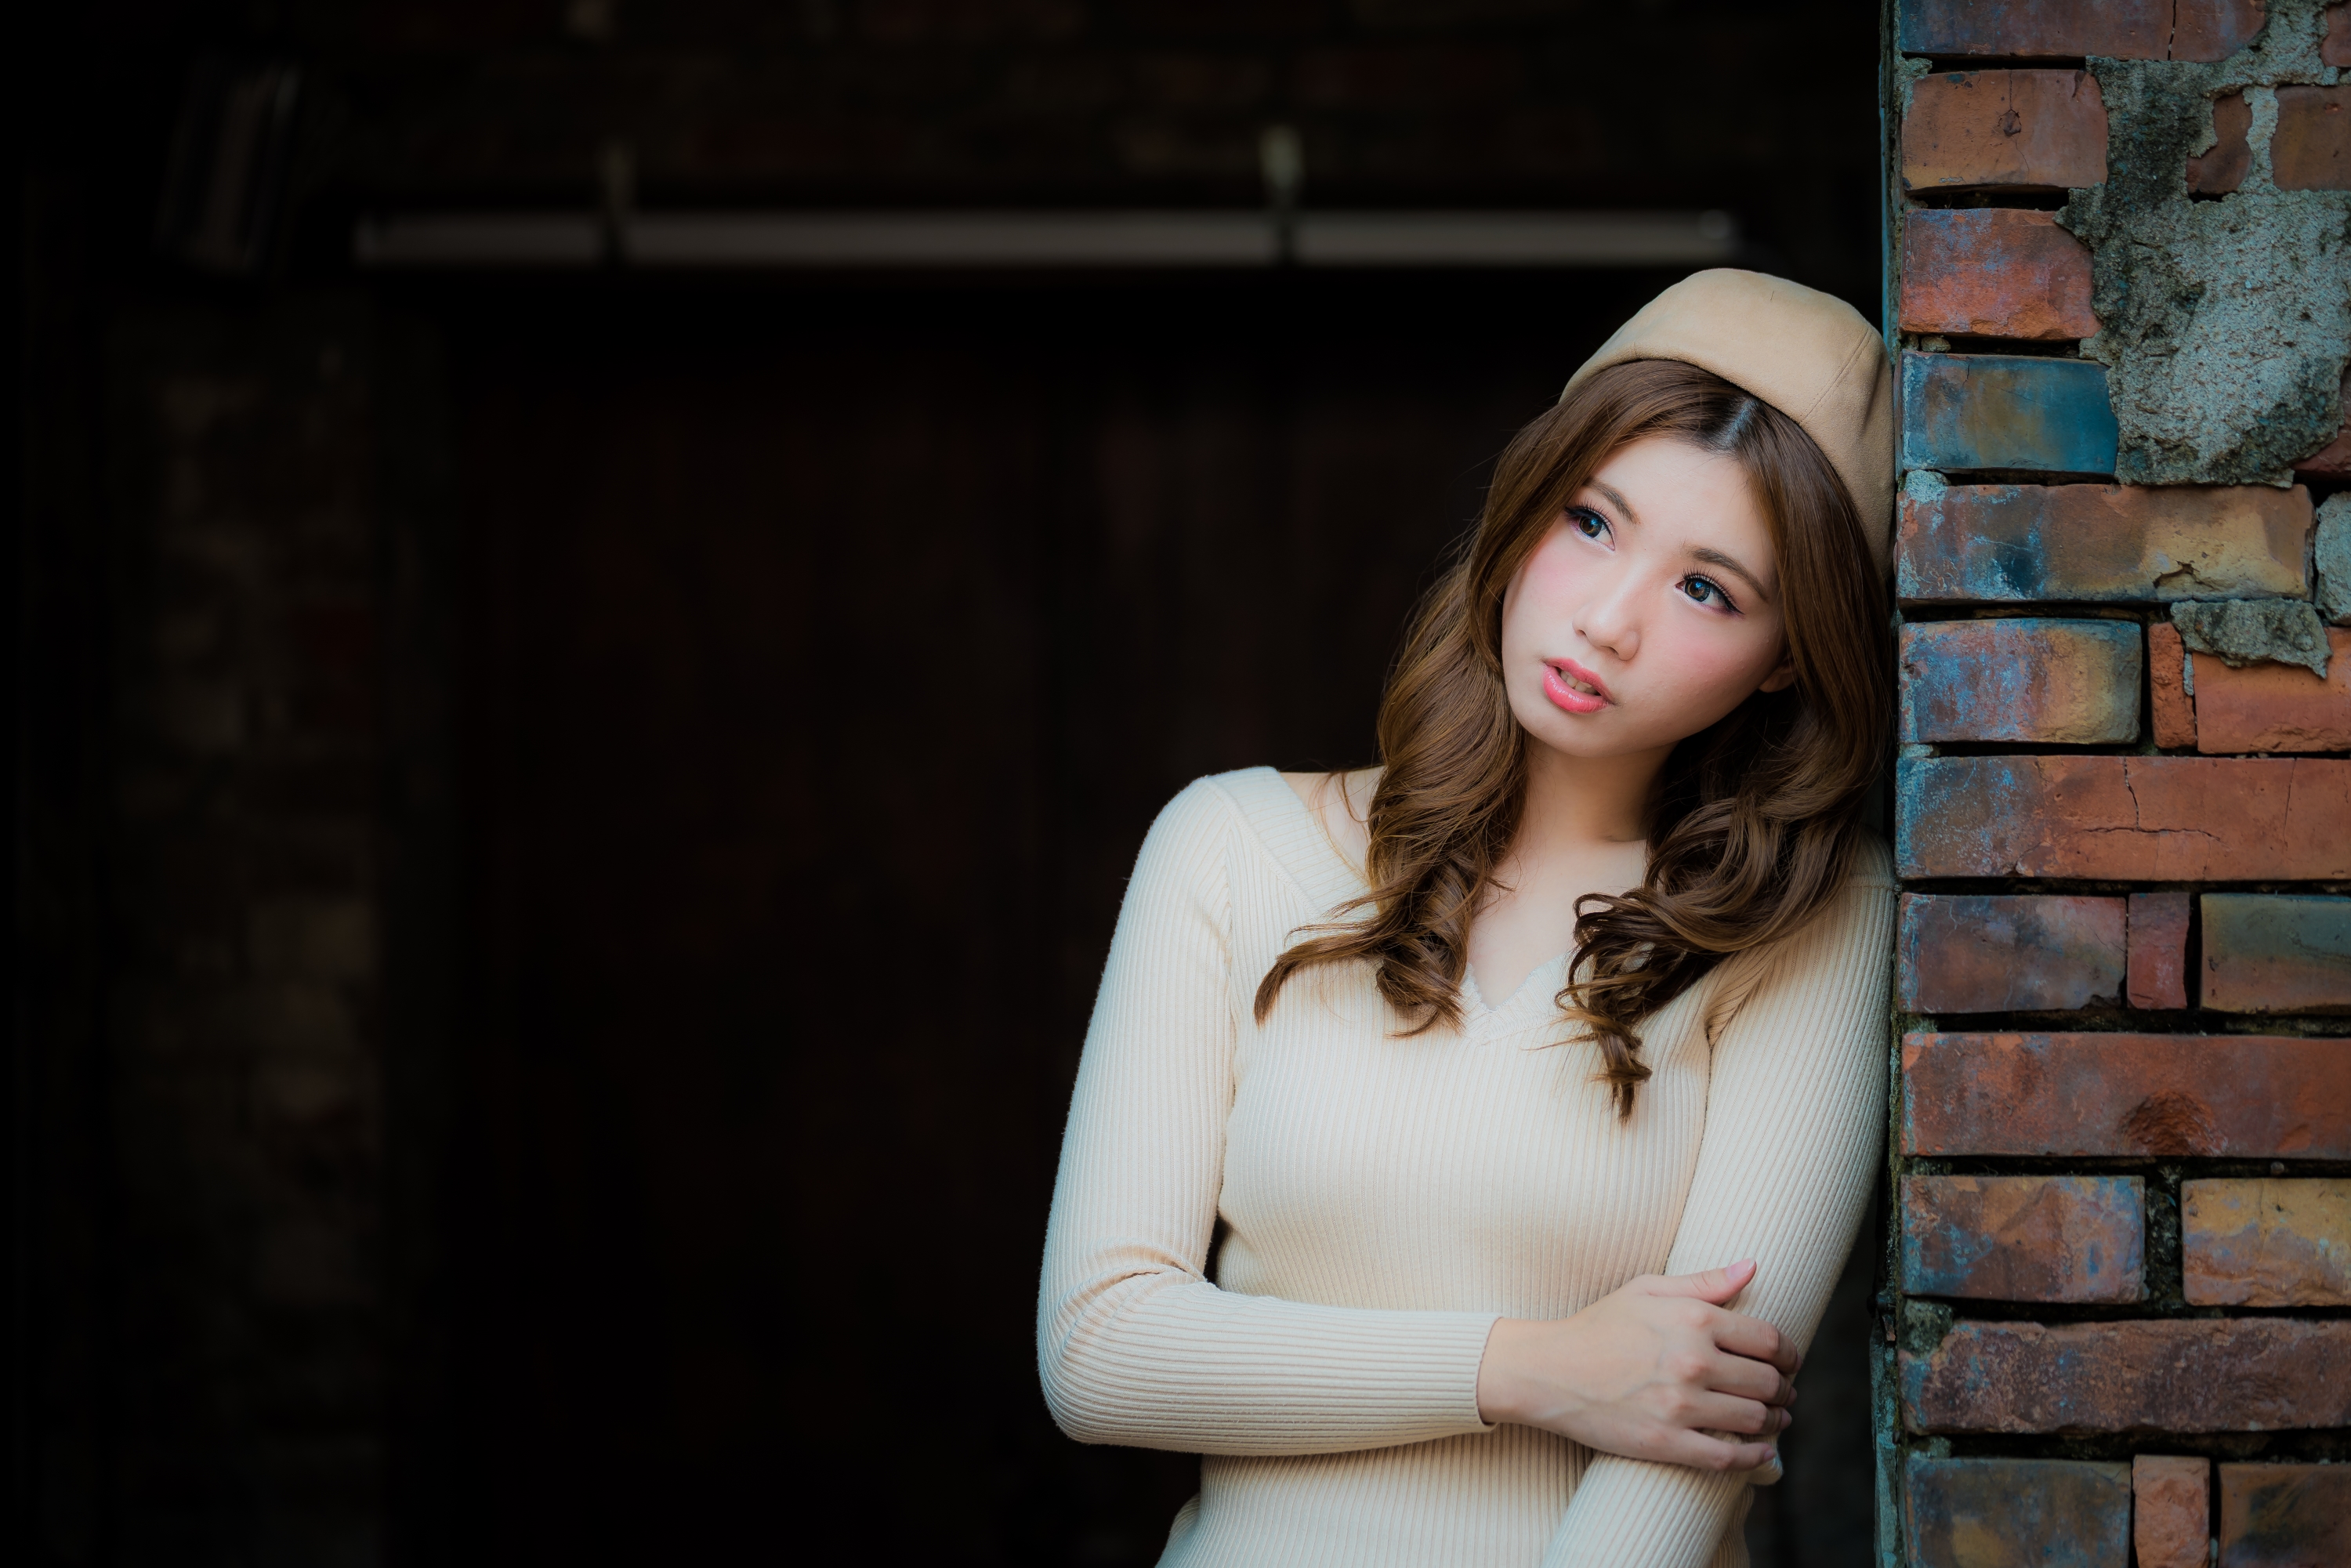 Asian Women Brunette Berets Women Outdoors Model Looking Into The Distance Sweater Contact Lenses Ar 3000x2001